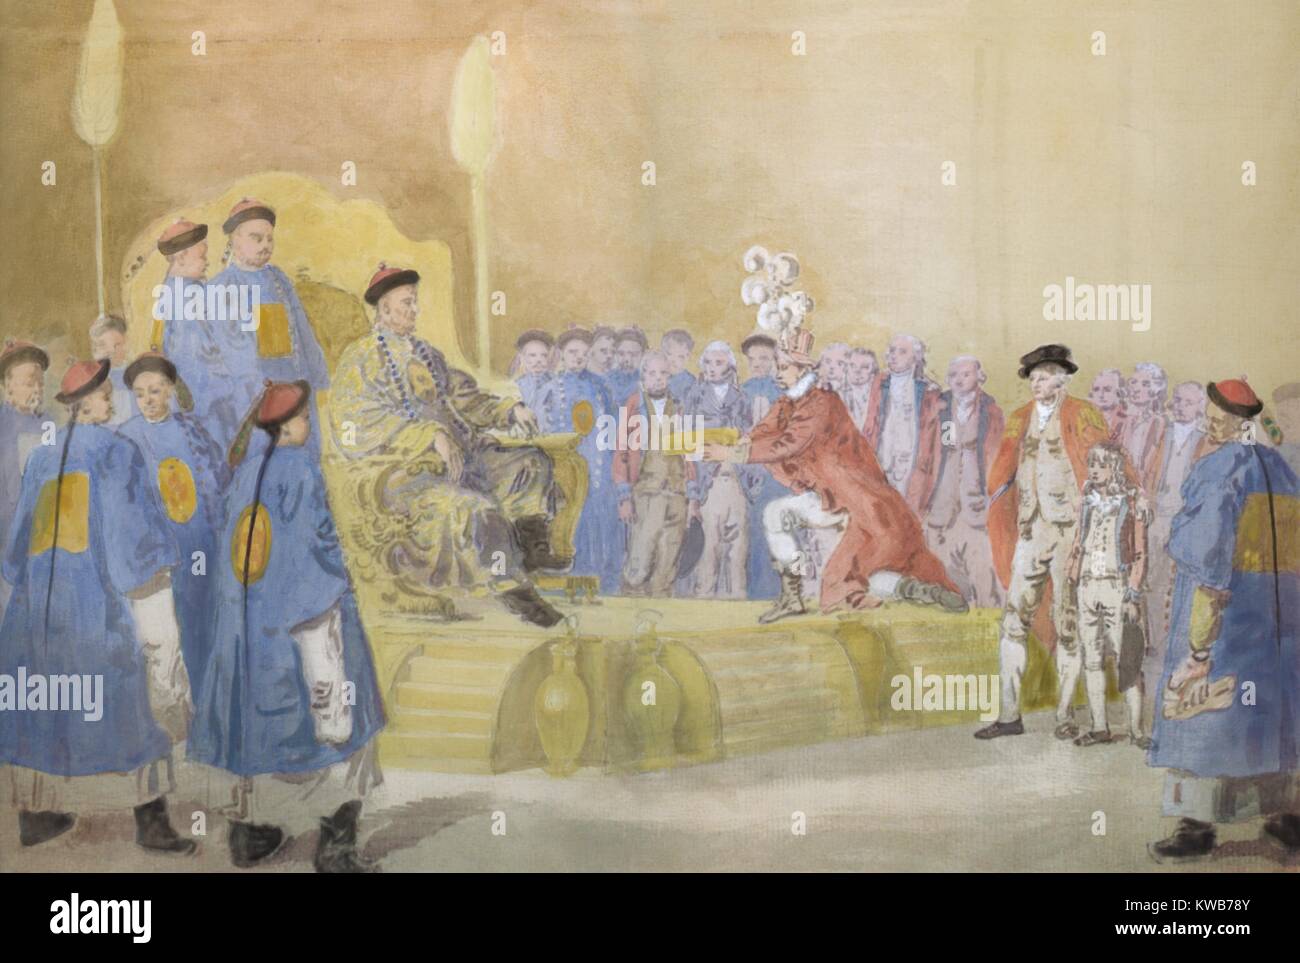 British Ambassador George MacCartney kneeling before the Qianlong Emperor of China, Sept 14, 1793. Standing behind the Emperor is Viceroy Liang Kentang and the future Jiaqing Emperor. To MacCartney's left are George Staunton and his Chinese speaking son, (BSIC 2016 9 1) Stock Photo